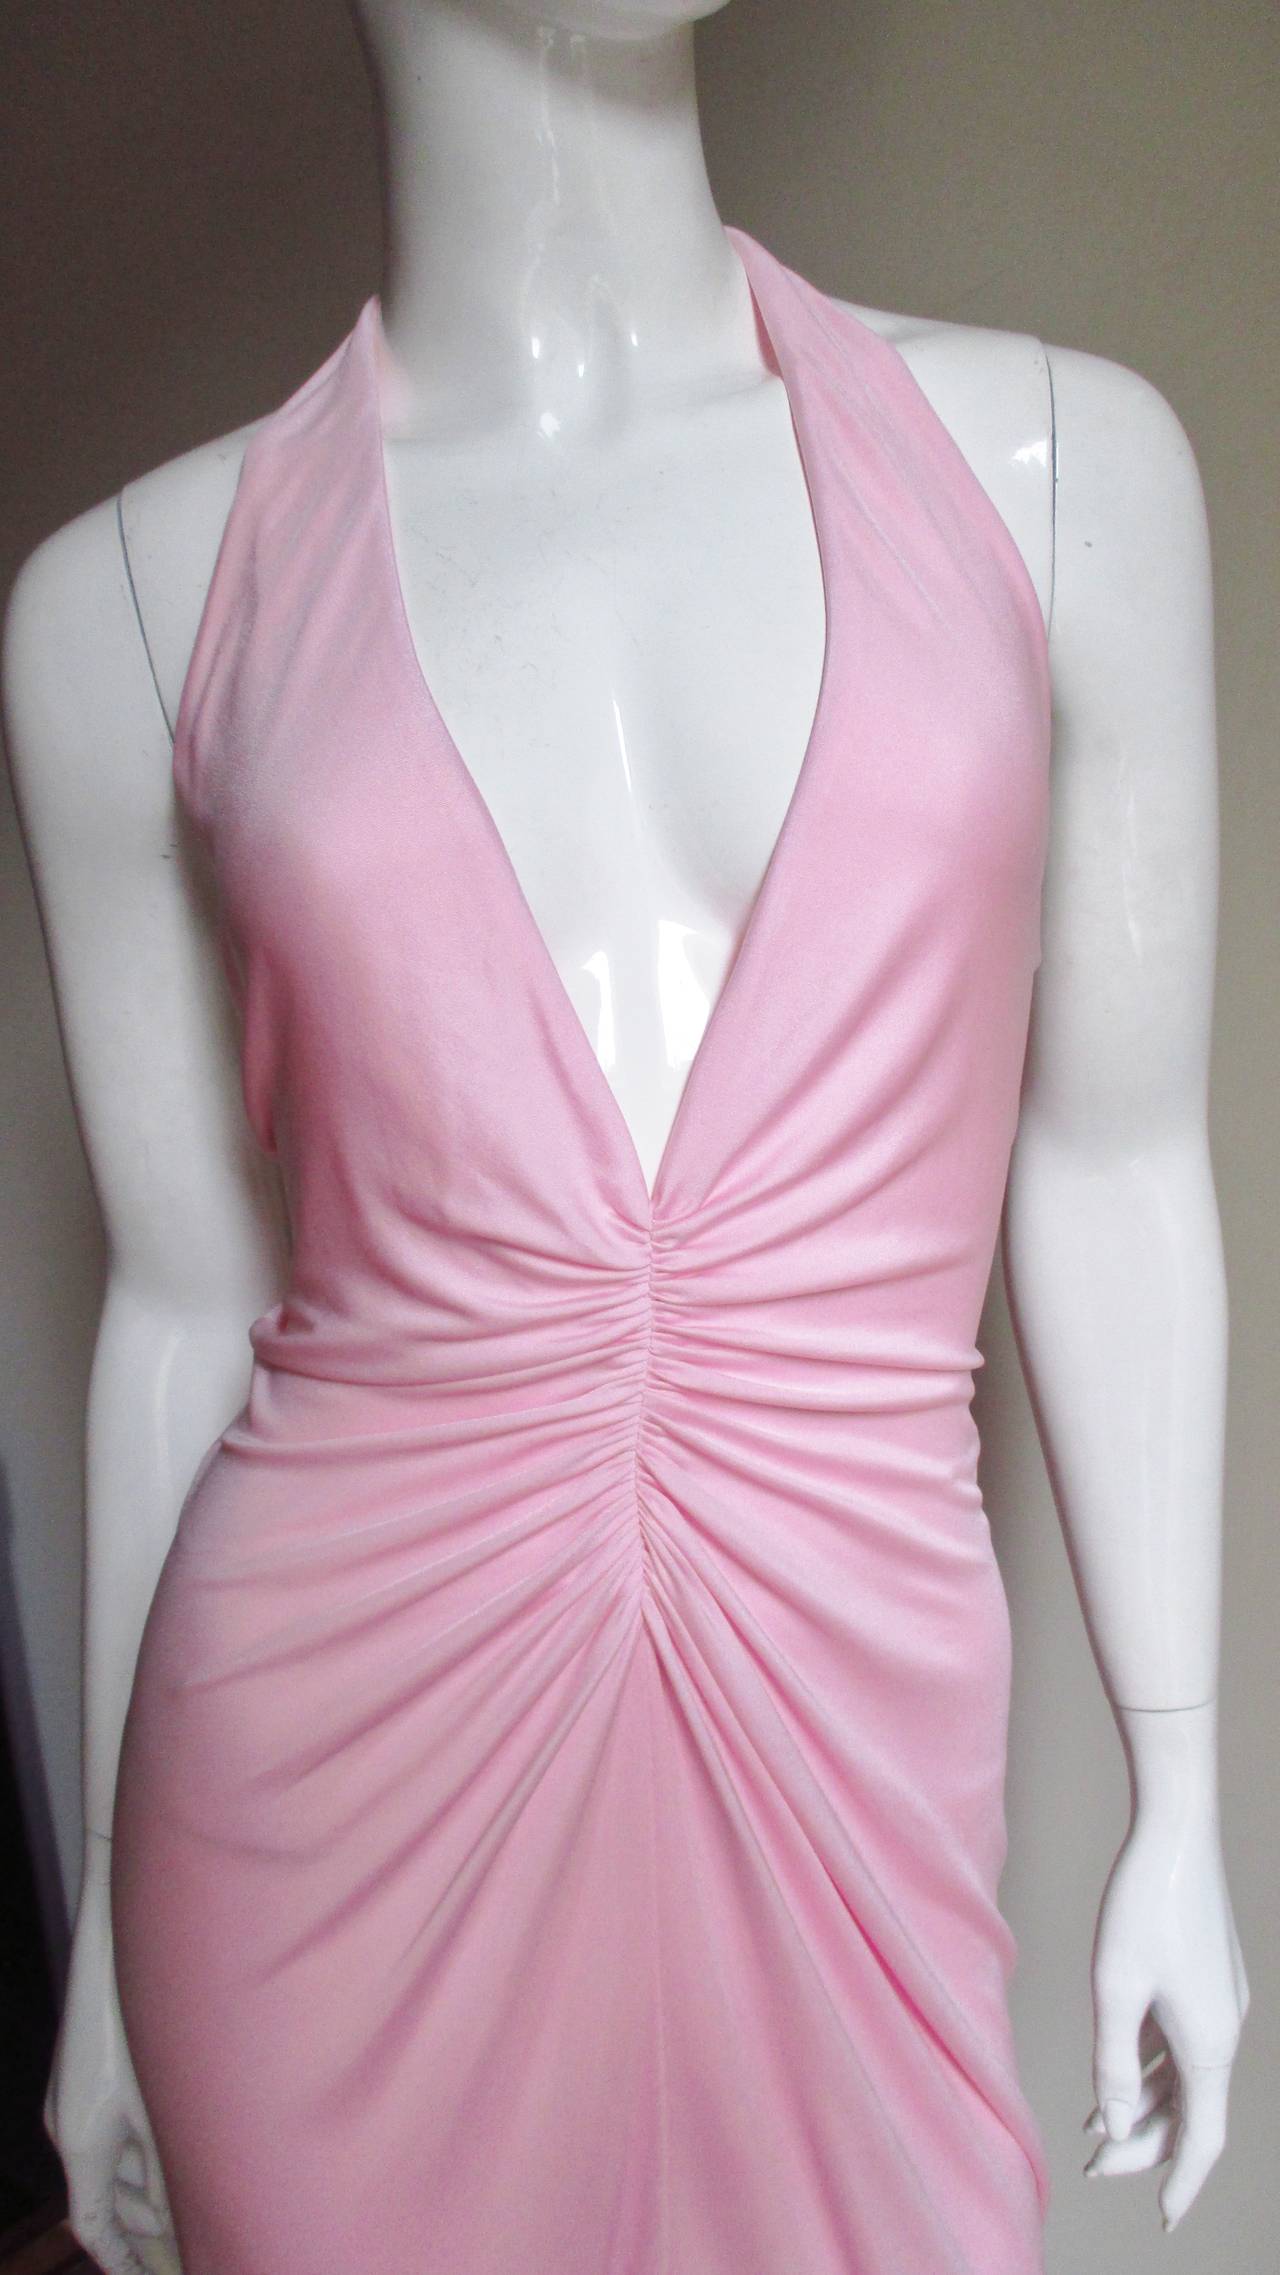 Another great plunge halter with impeccable fit in a soft pink silk jersey from Versace.  It has a flattering plunge V neckline with soft ruching along the center front and back through to the hips enhancing the fit and shape.  The skirt skims the